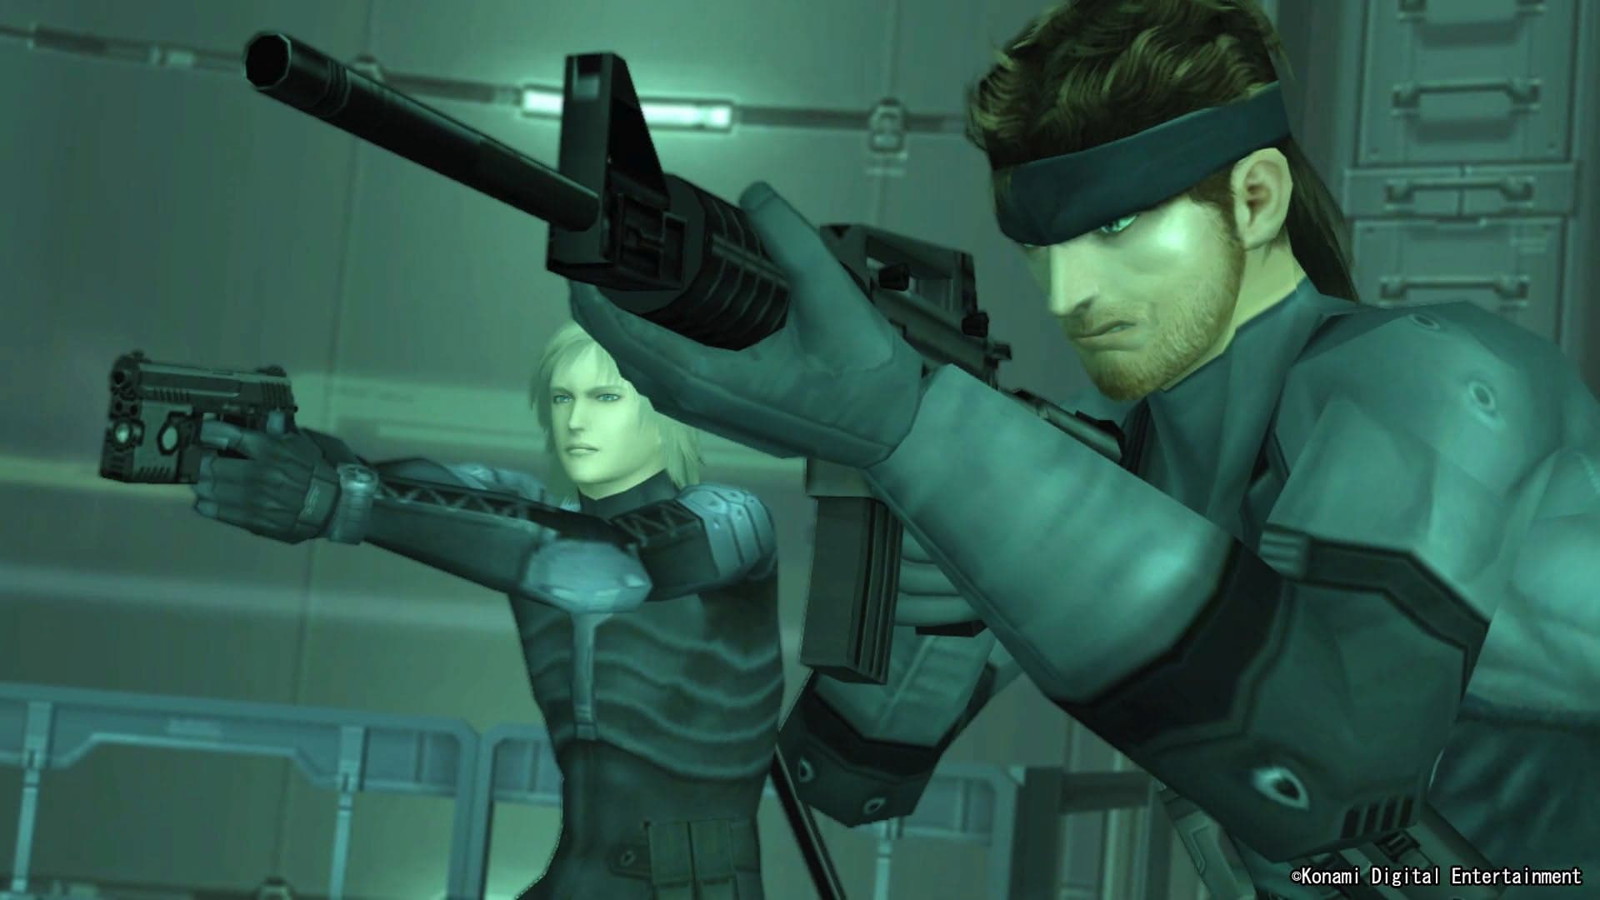 Konami has confirmed to fix issues in Metal Gear Solid Master Collection Vol. 1 with a post-launch patch update.